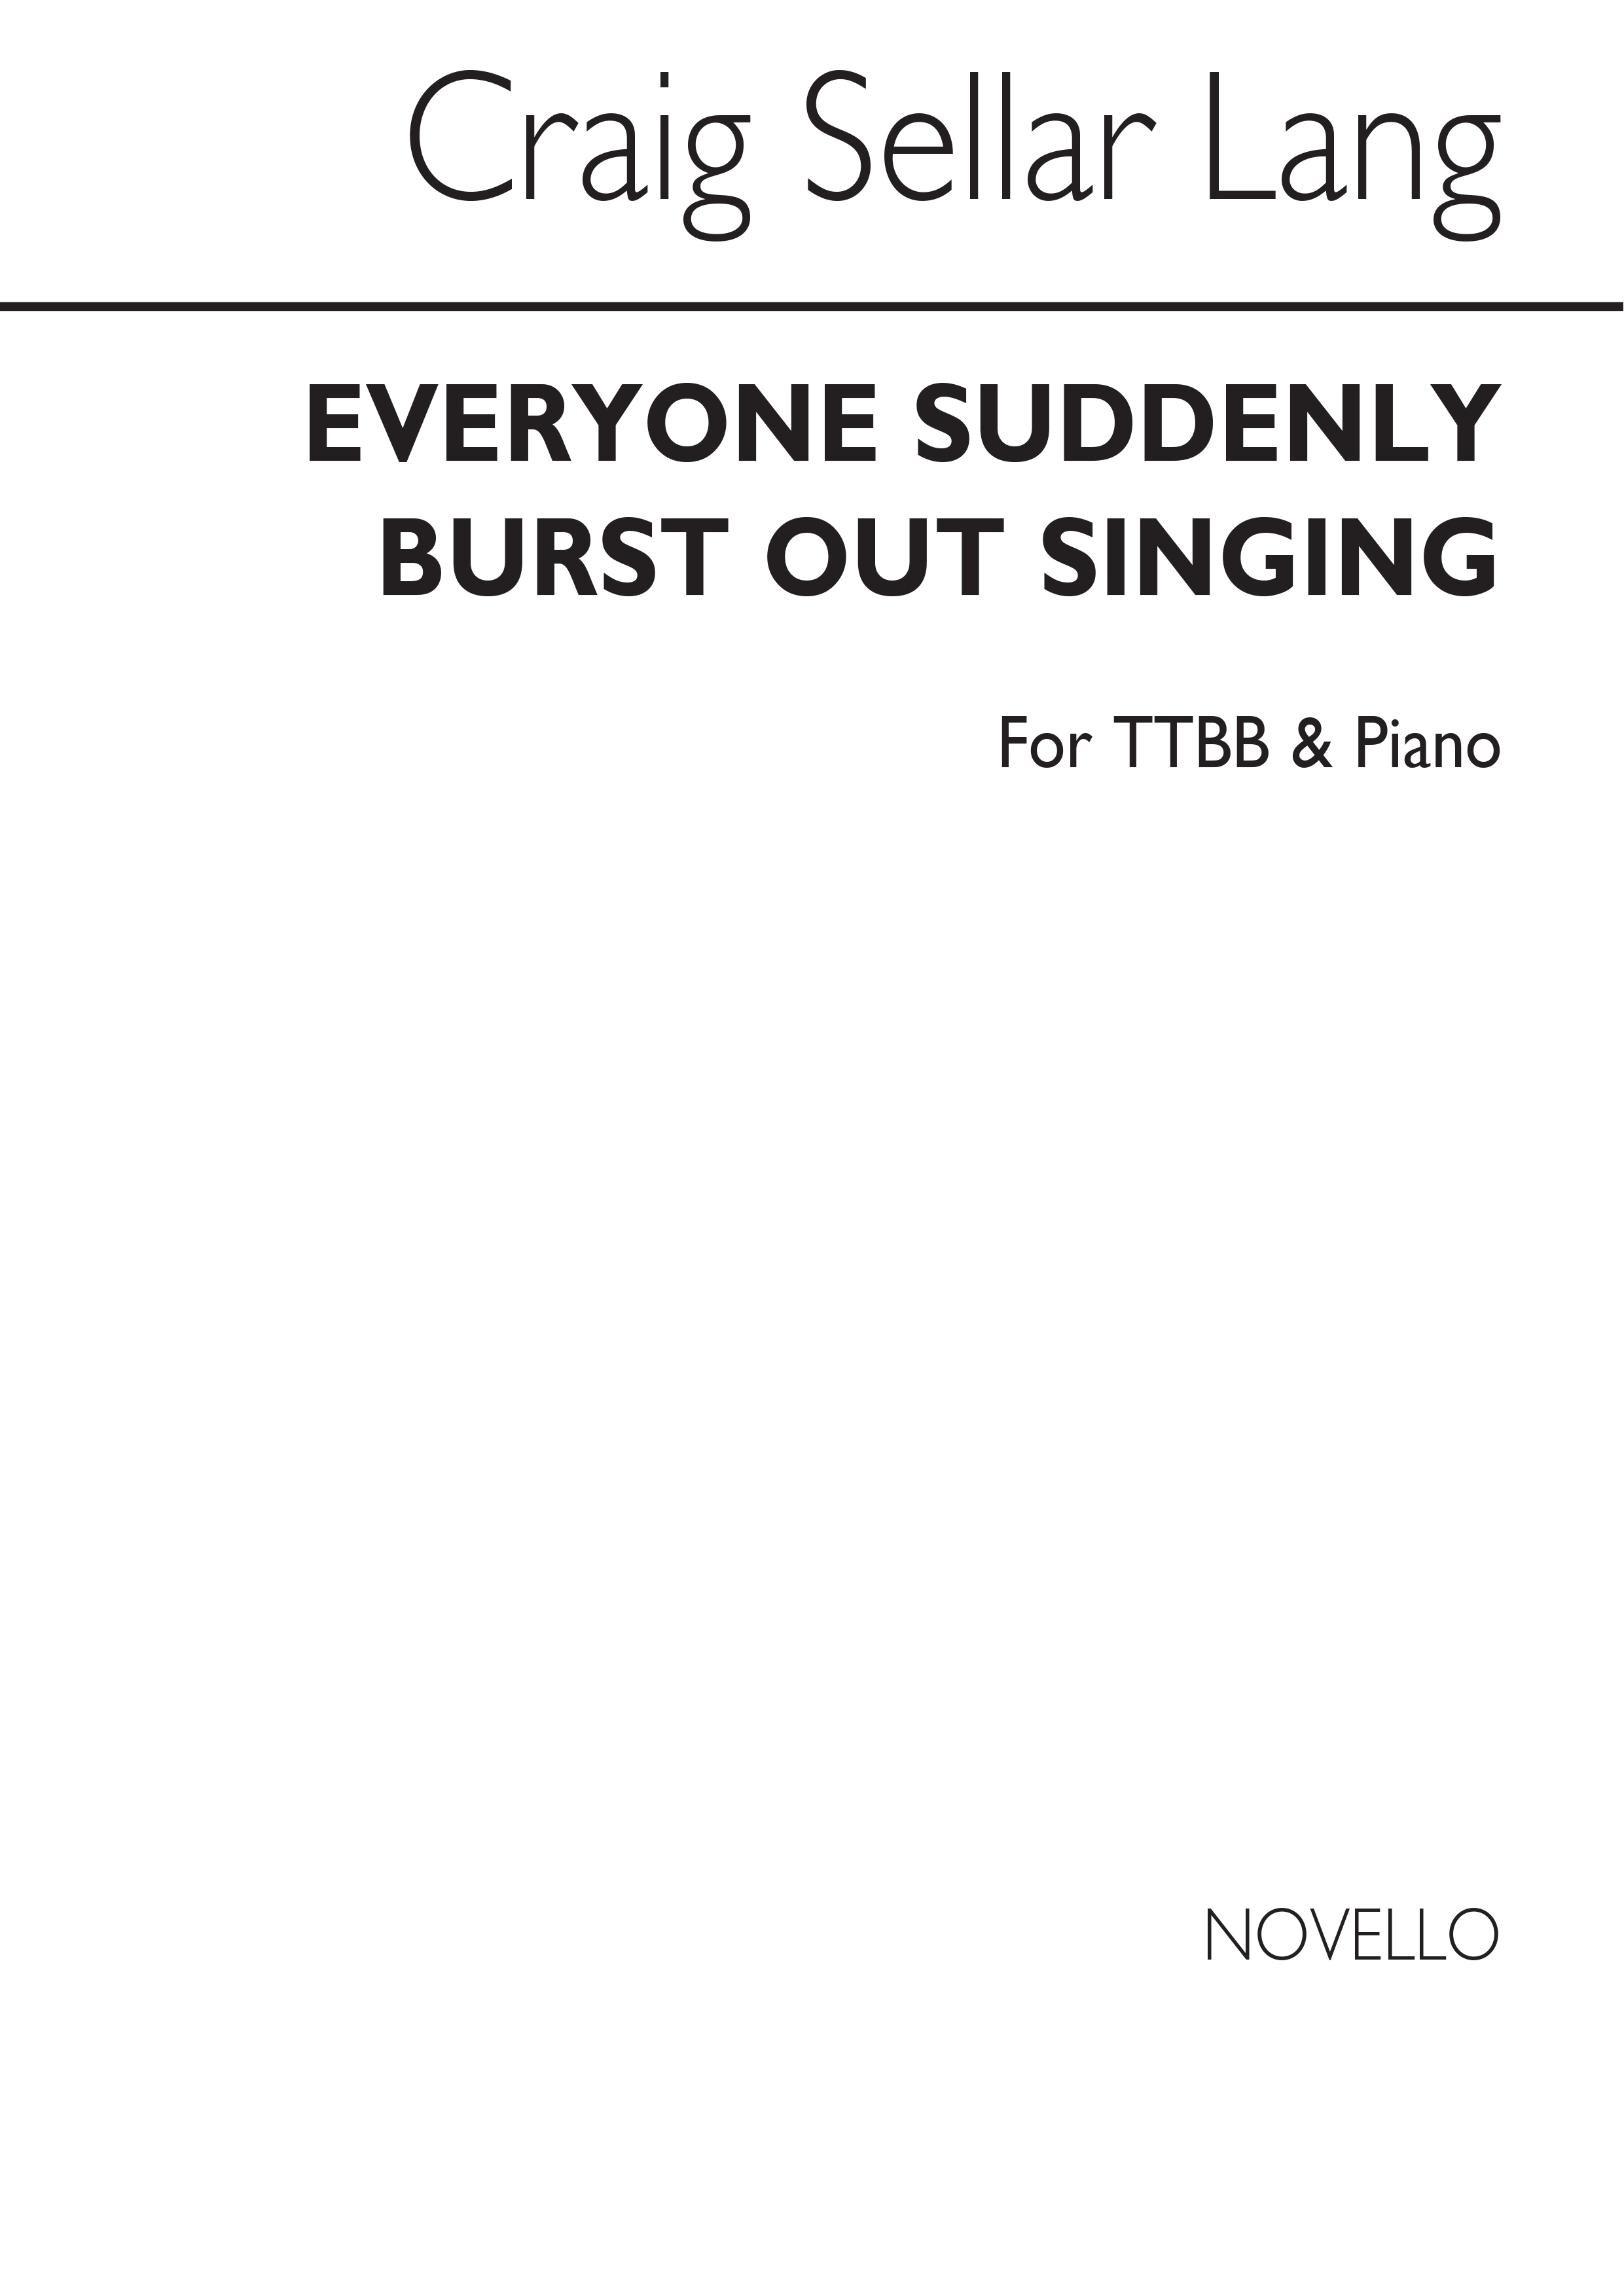 C.S. Lang: Everyone Suddenly Burst Out Singing: TTBB: Vocal Score